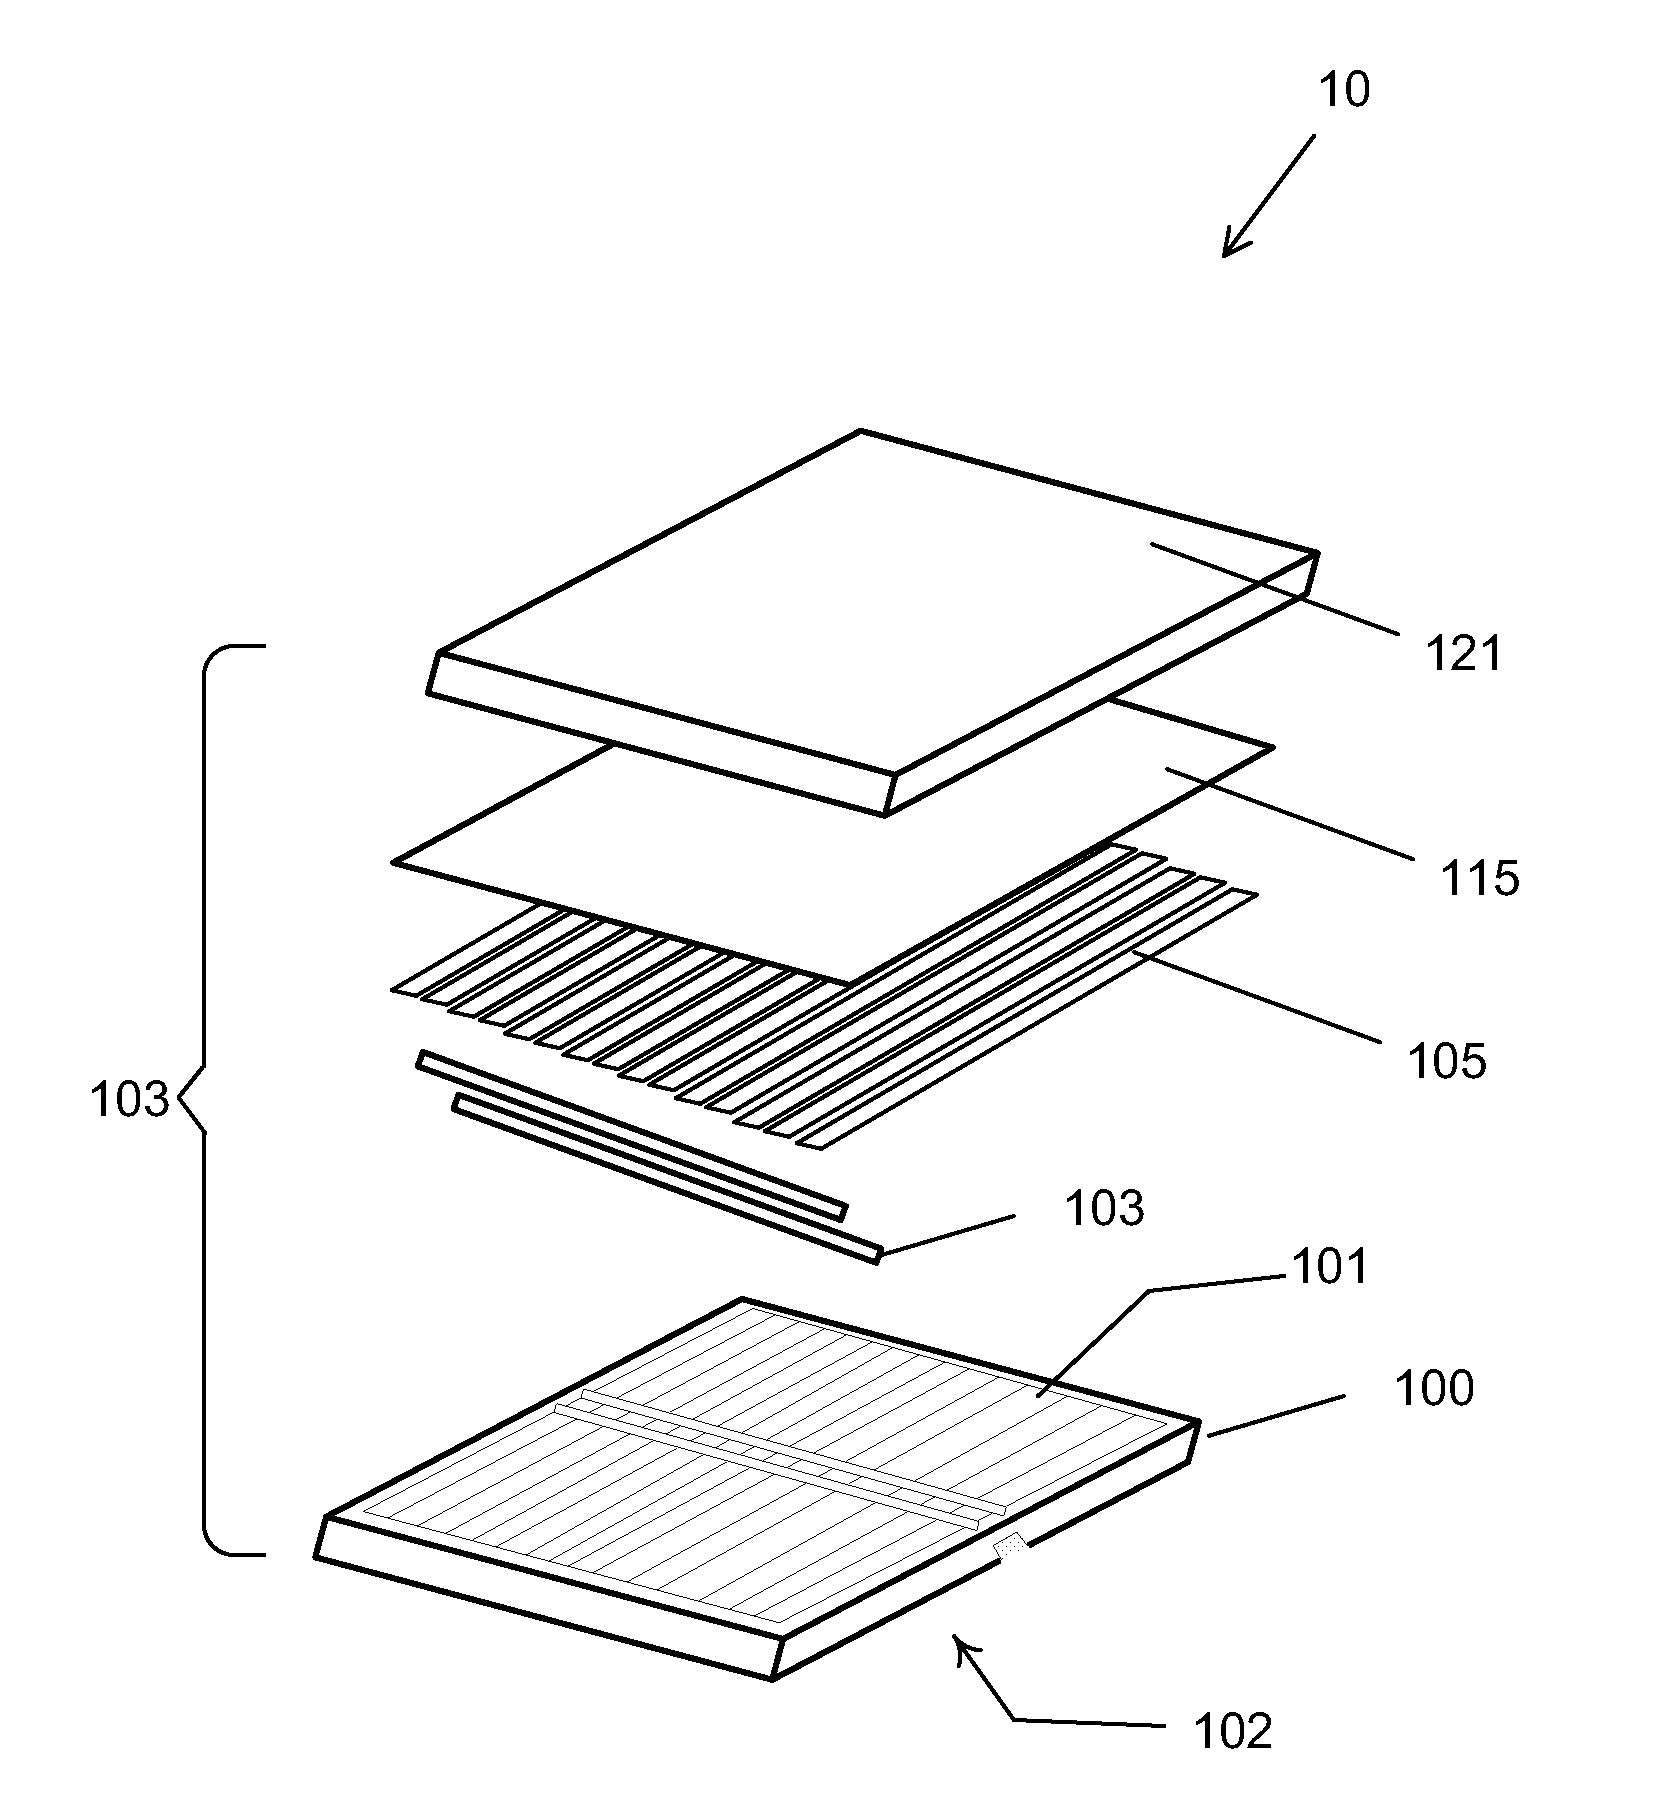 Thermal management method and device for solar concentrator systems